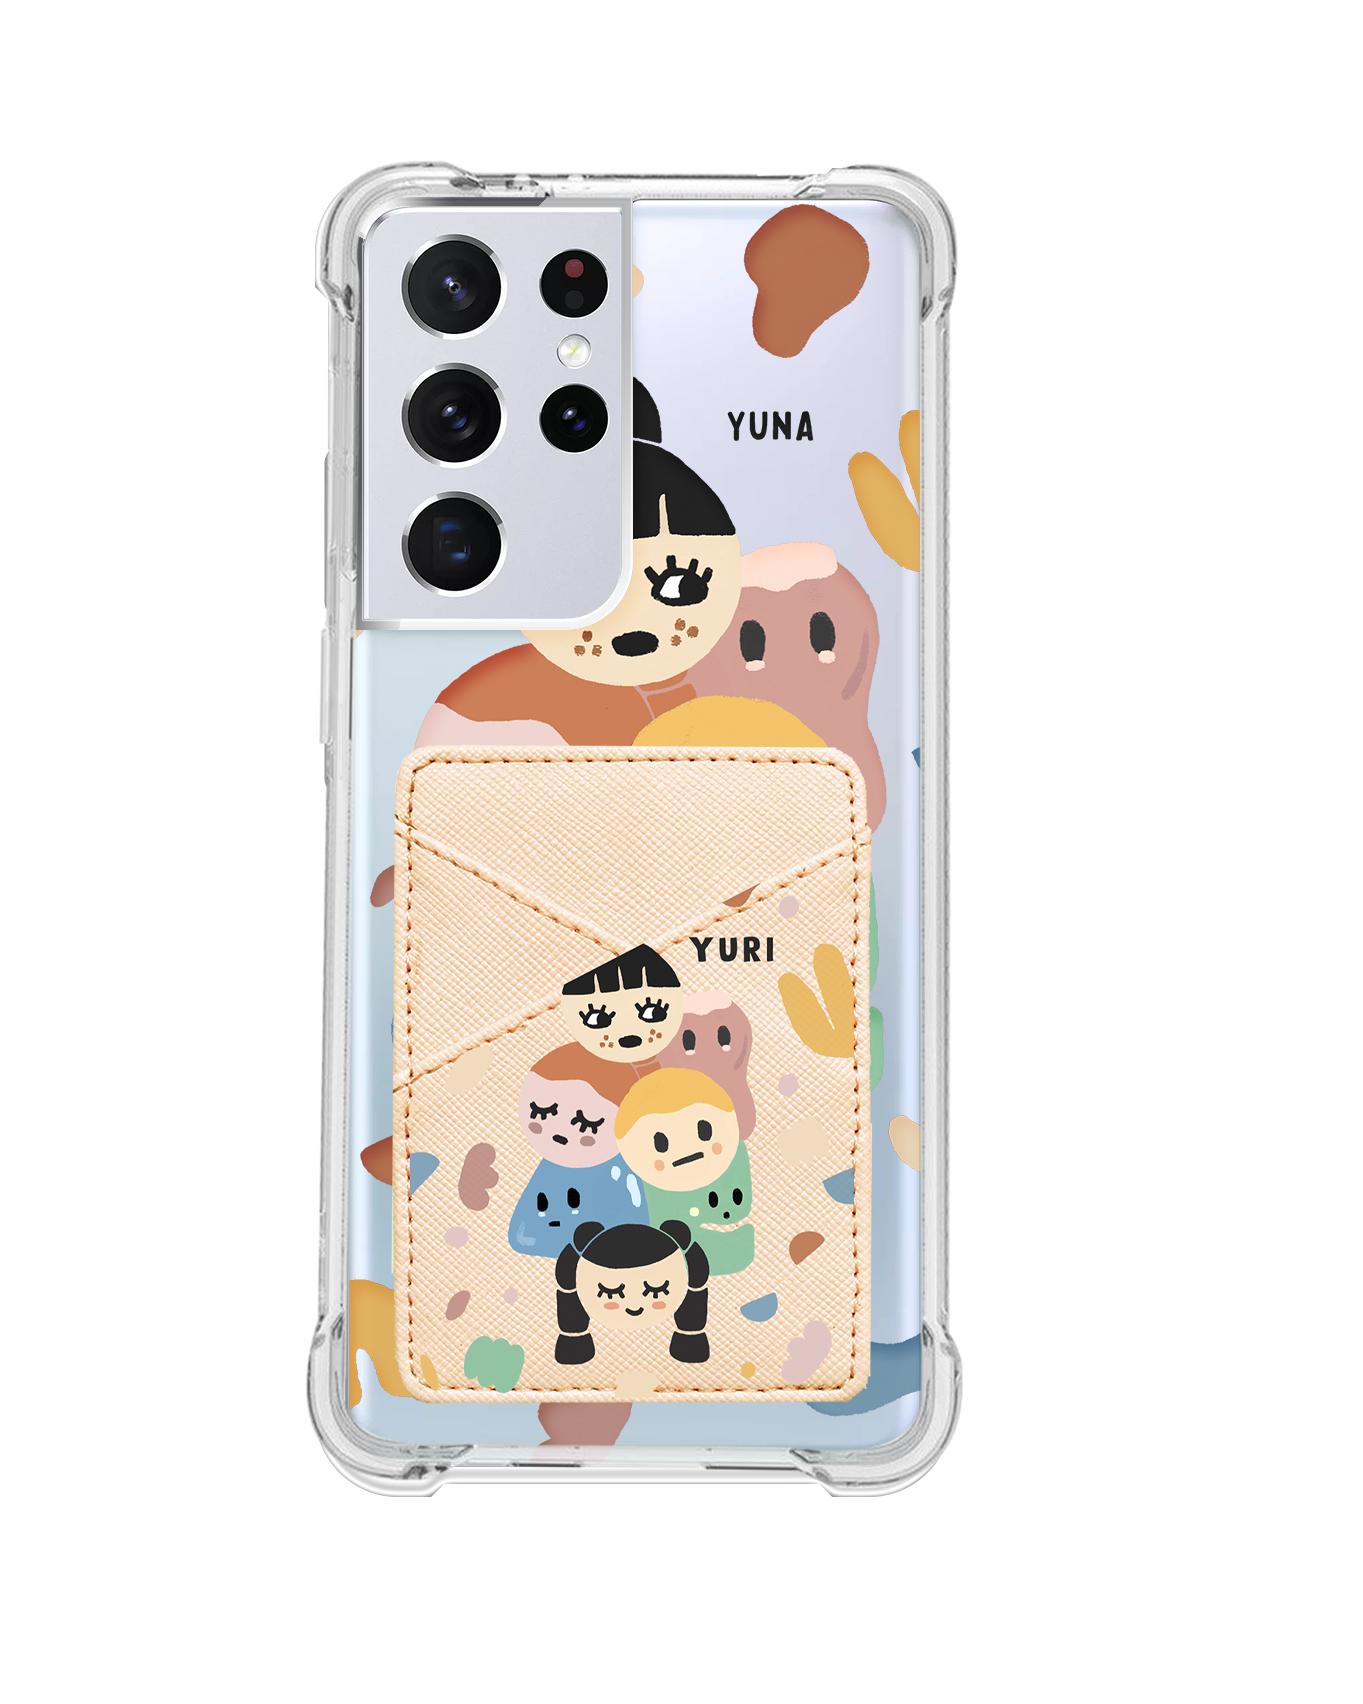 Android Phone Wallet Case - Doodle 1.0